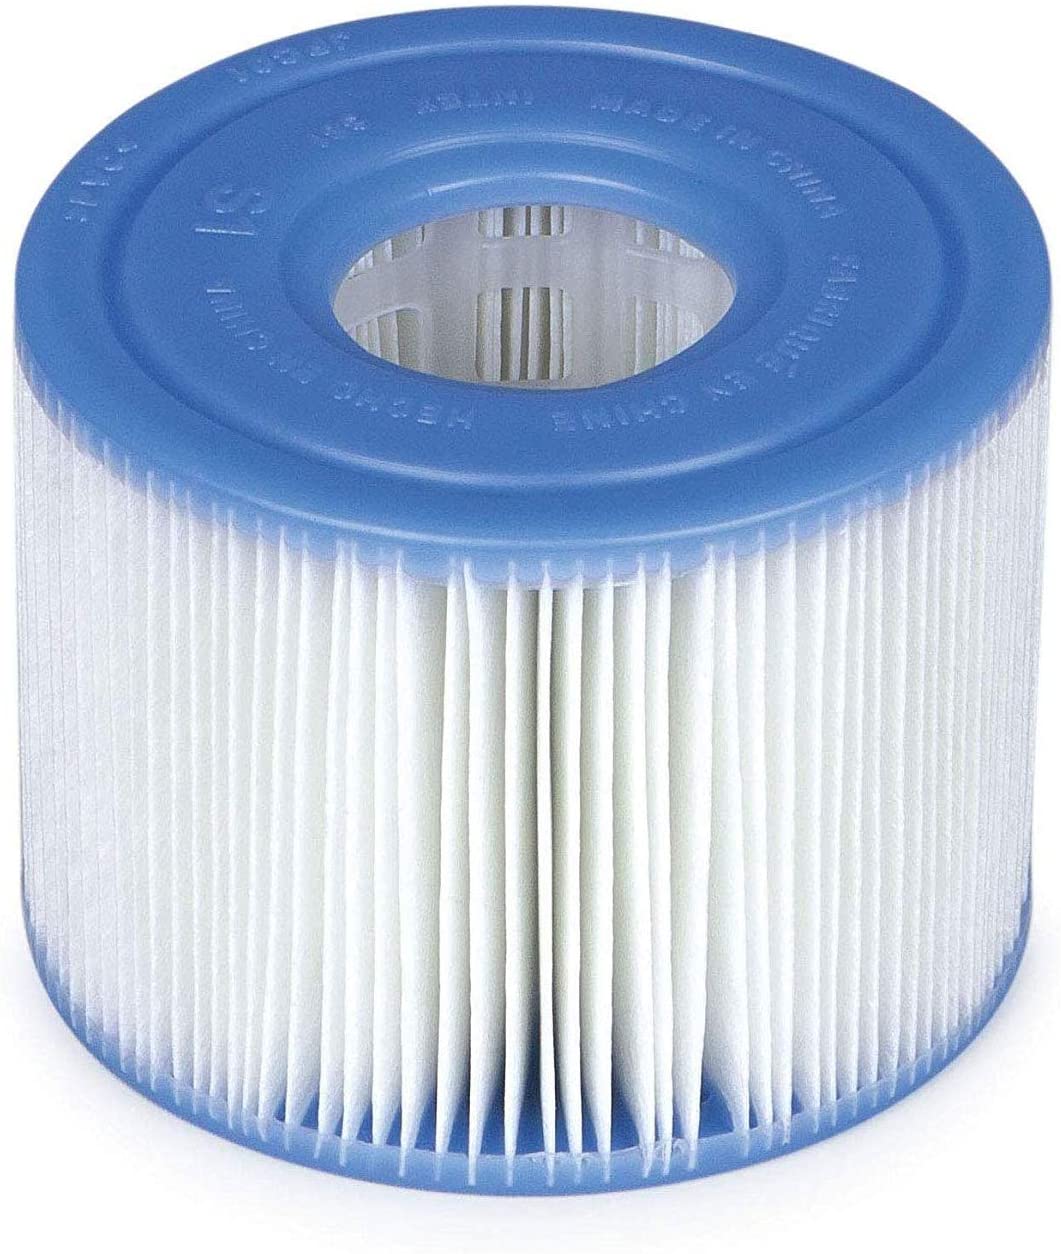 Intex 29011E Type S1 PureSpa Easy Set Pool Spa Hot Tub Filter Replacement Cartridges (6 Filters), Blue and White